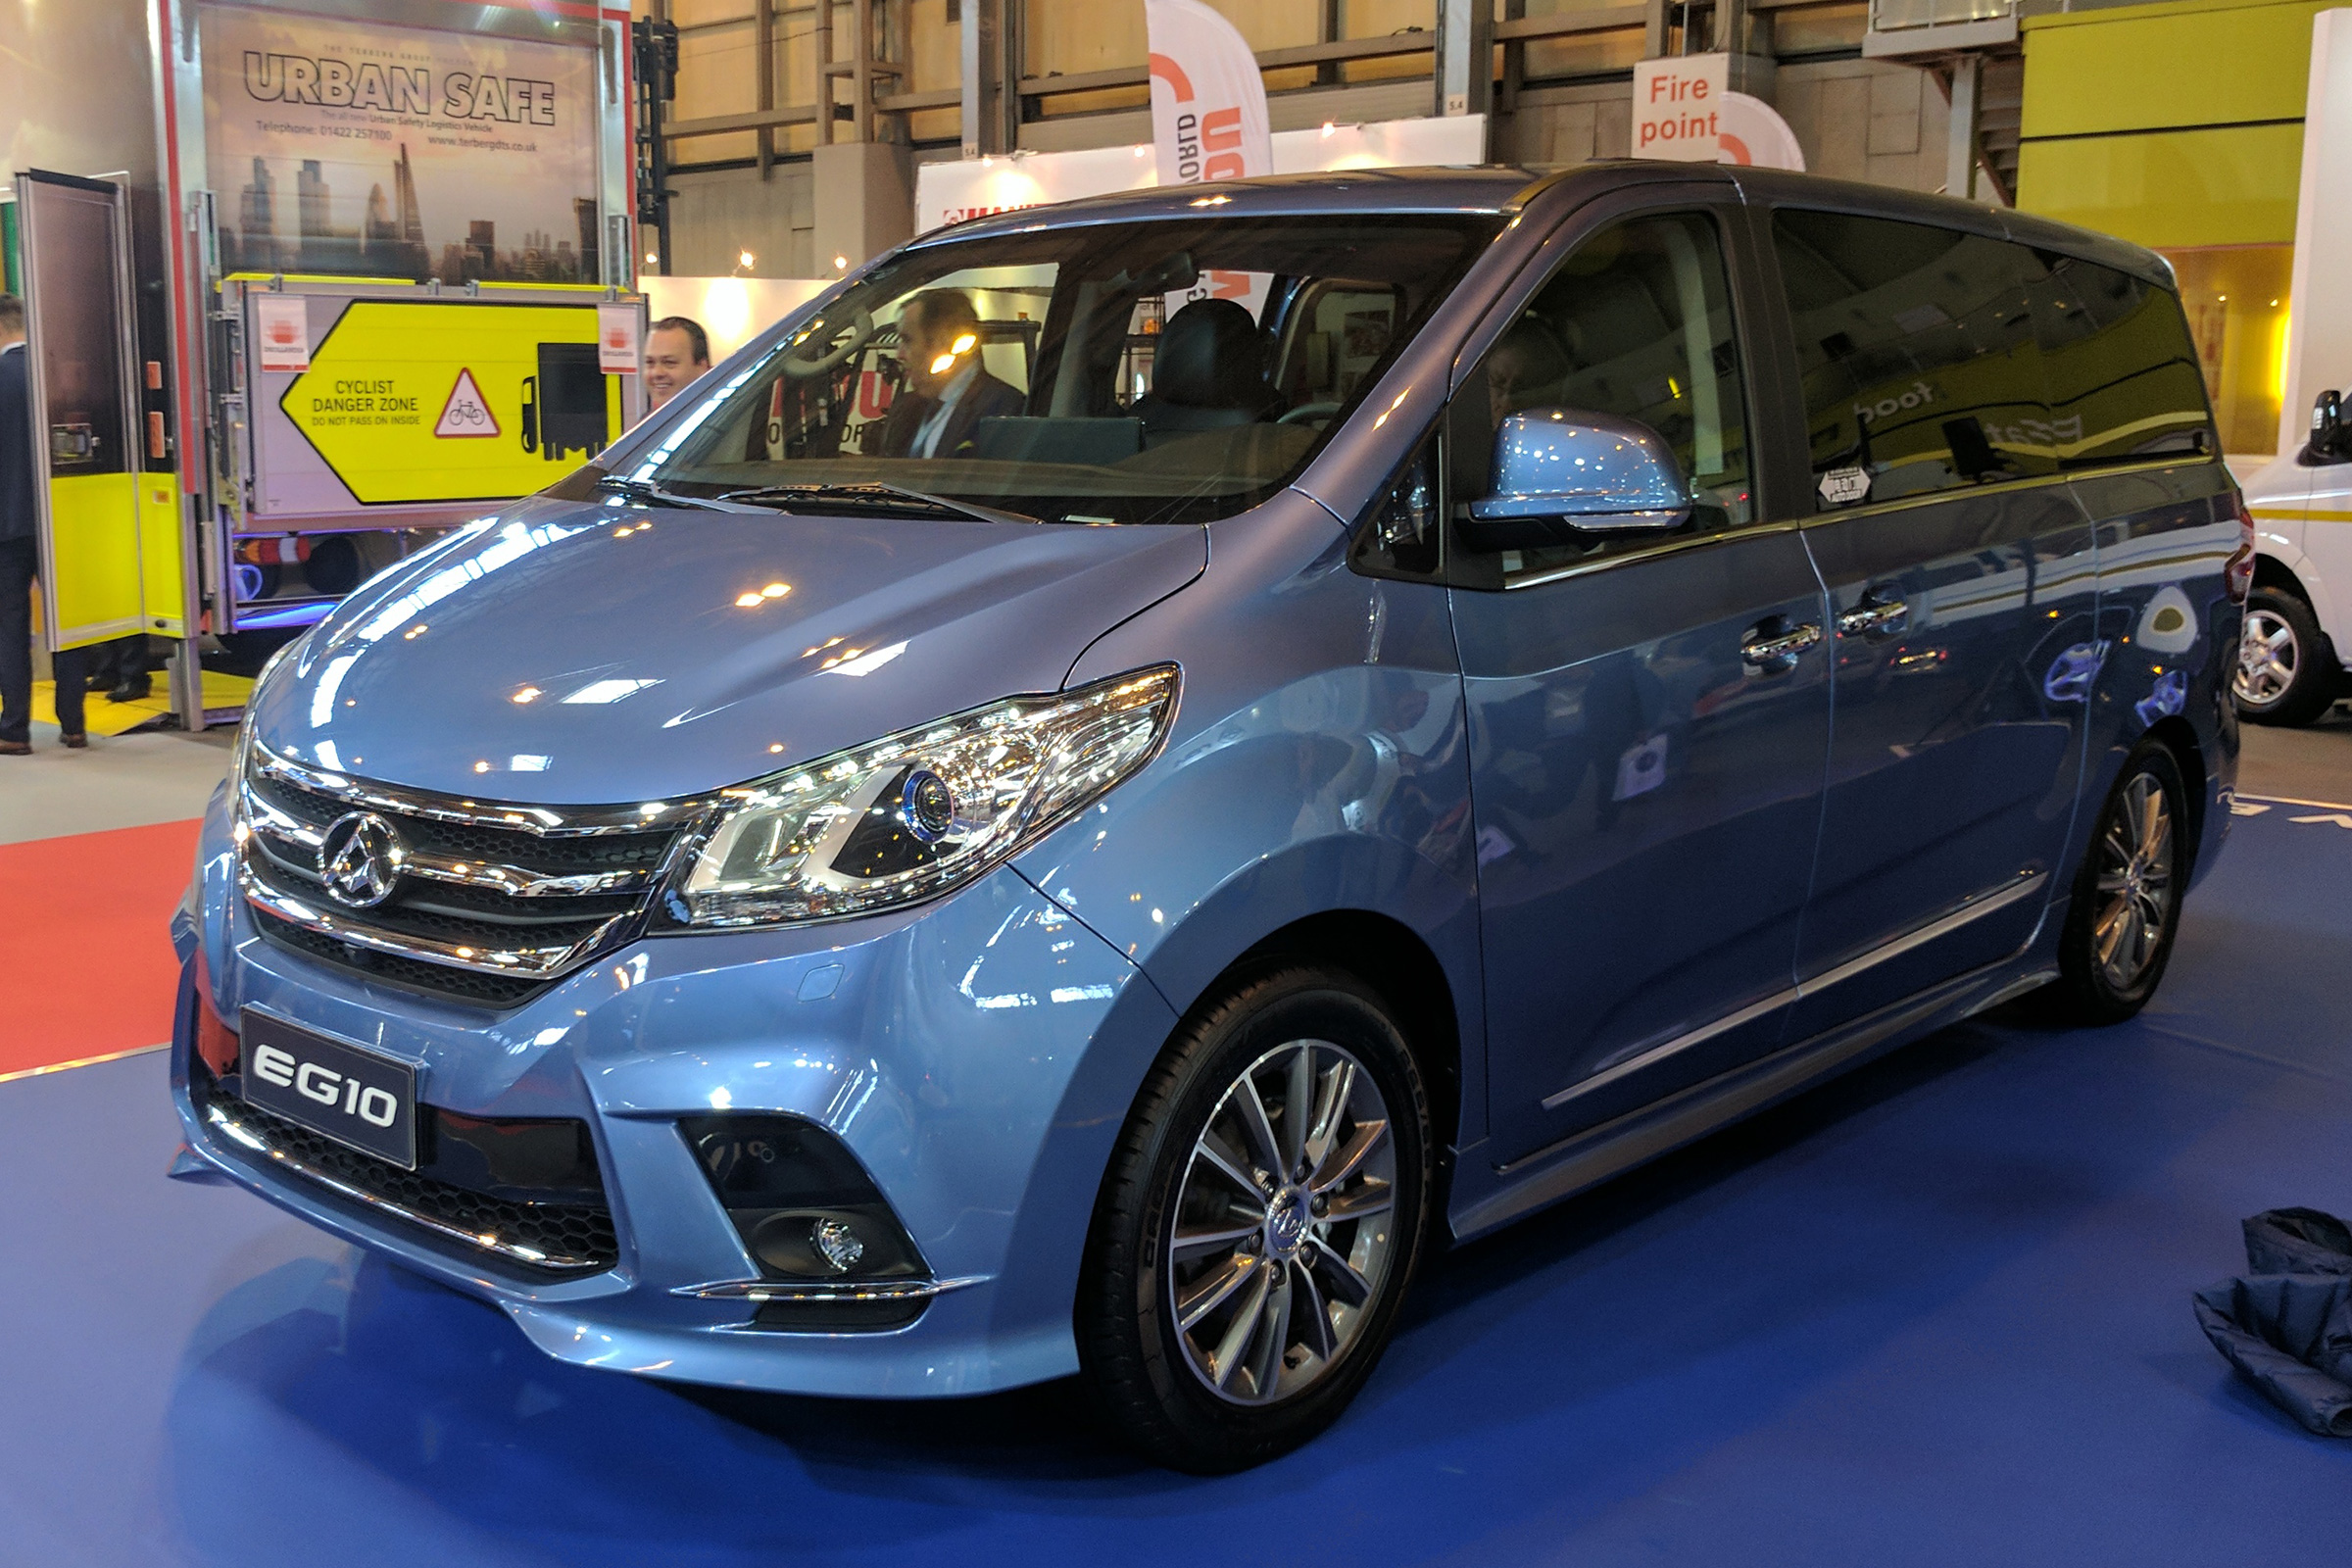 LDV G10 people carrier revealed in EG10 electric guise Auto Express